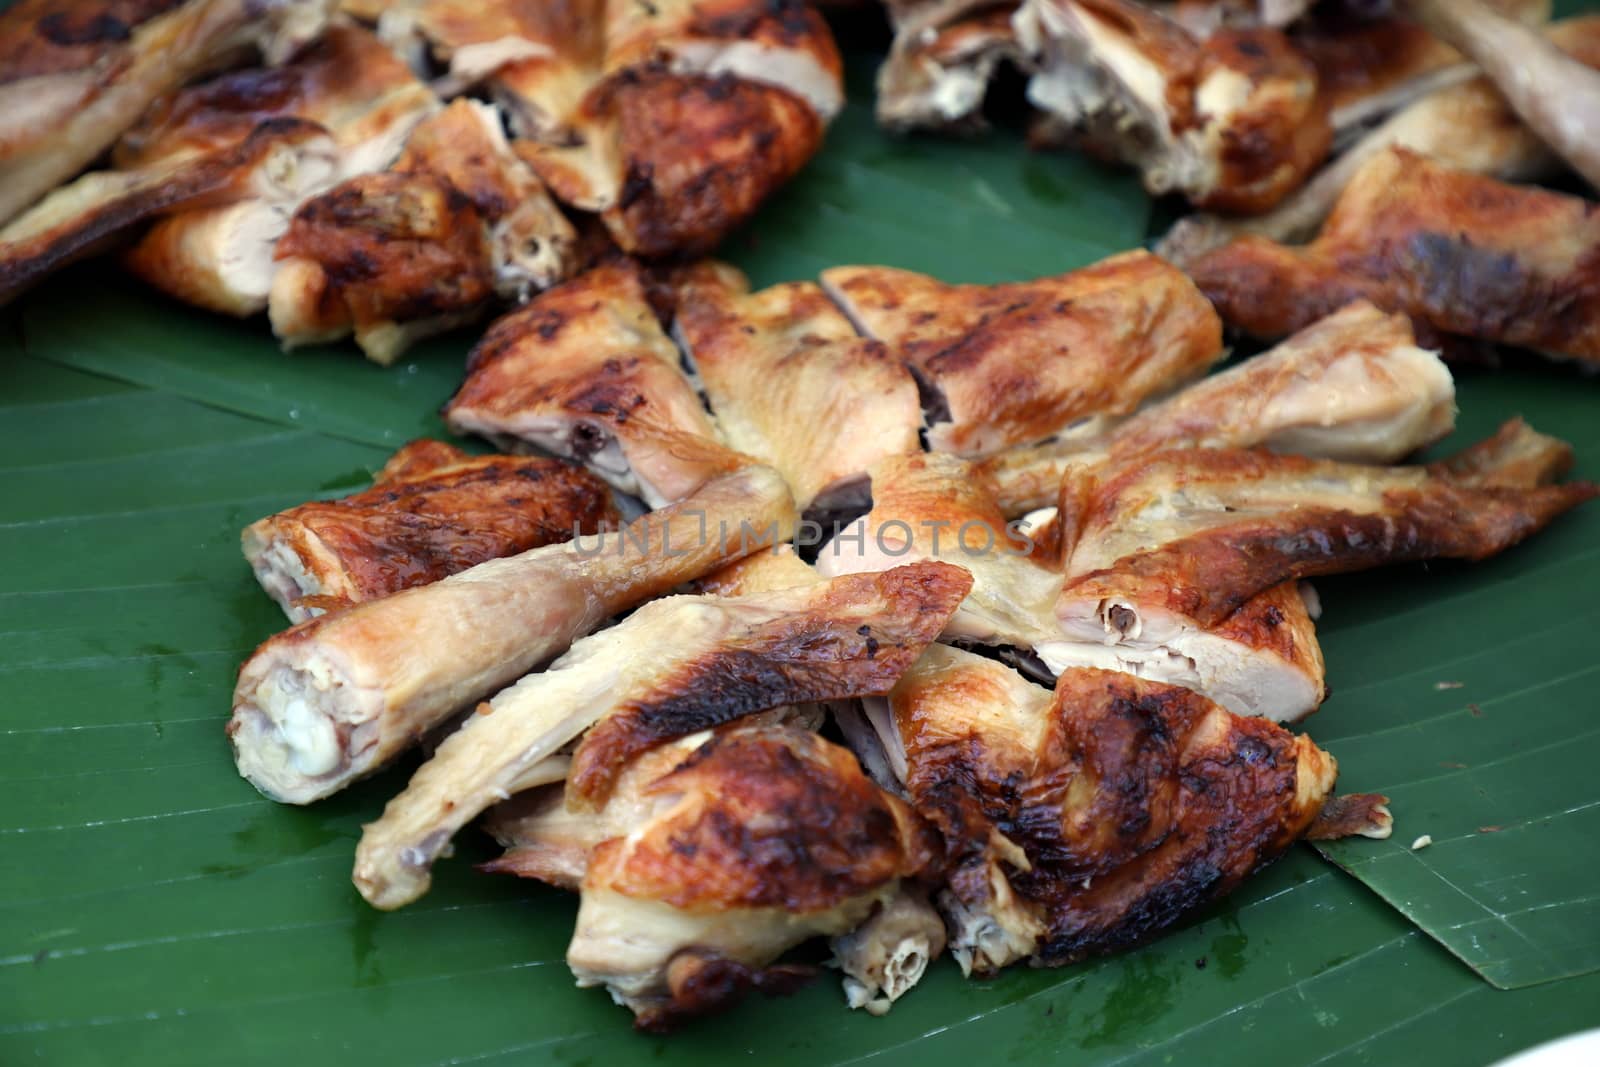 Grilled chicken cut into pieces Perfectly cooked, looks delicious. Nicely arranged on banana leaves. Selective focus. by joker3753